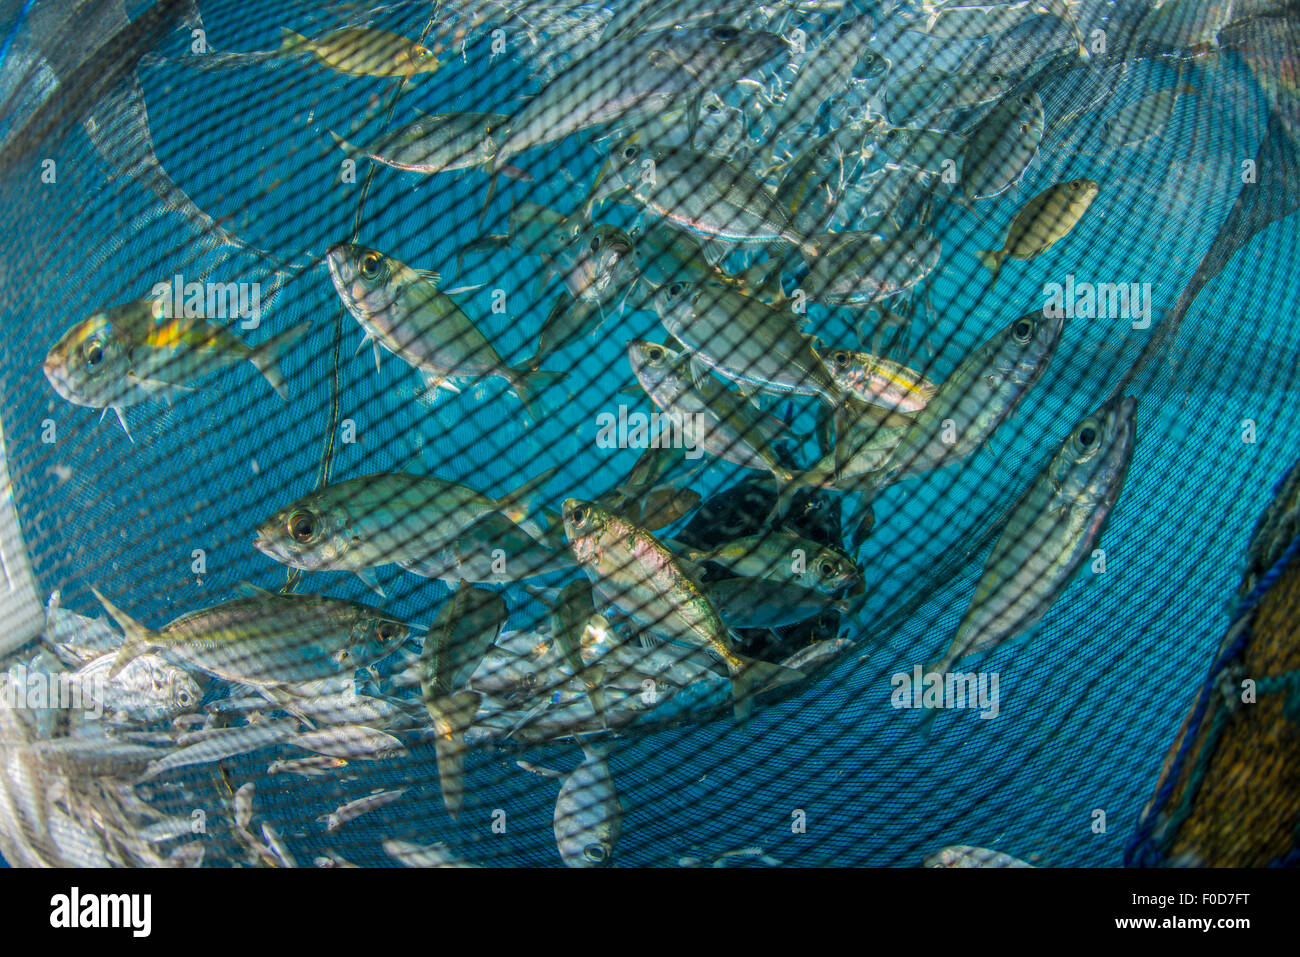 Fishing net with silvery and golden fish inside, Cenderawasih Bay, West  Papua, Indonesia Stock Photo - Alamy